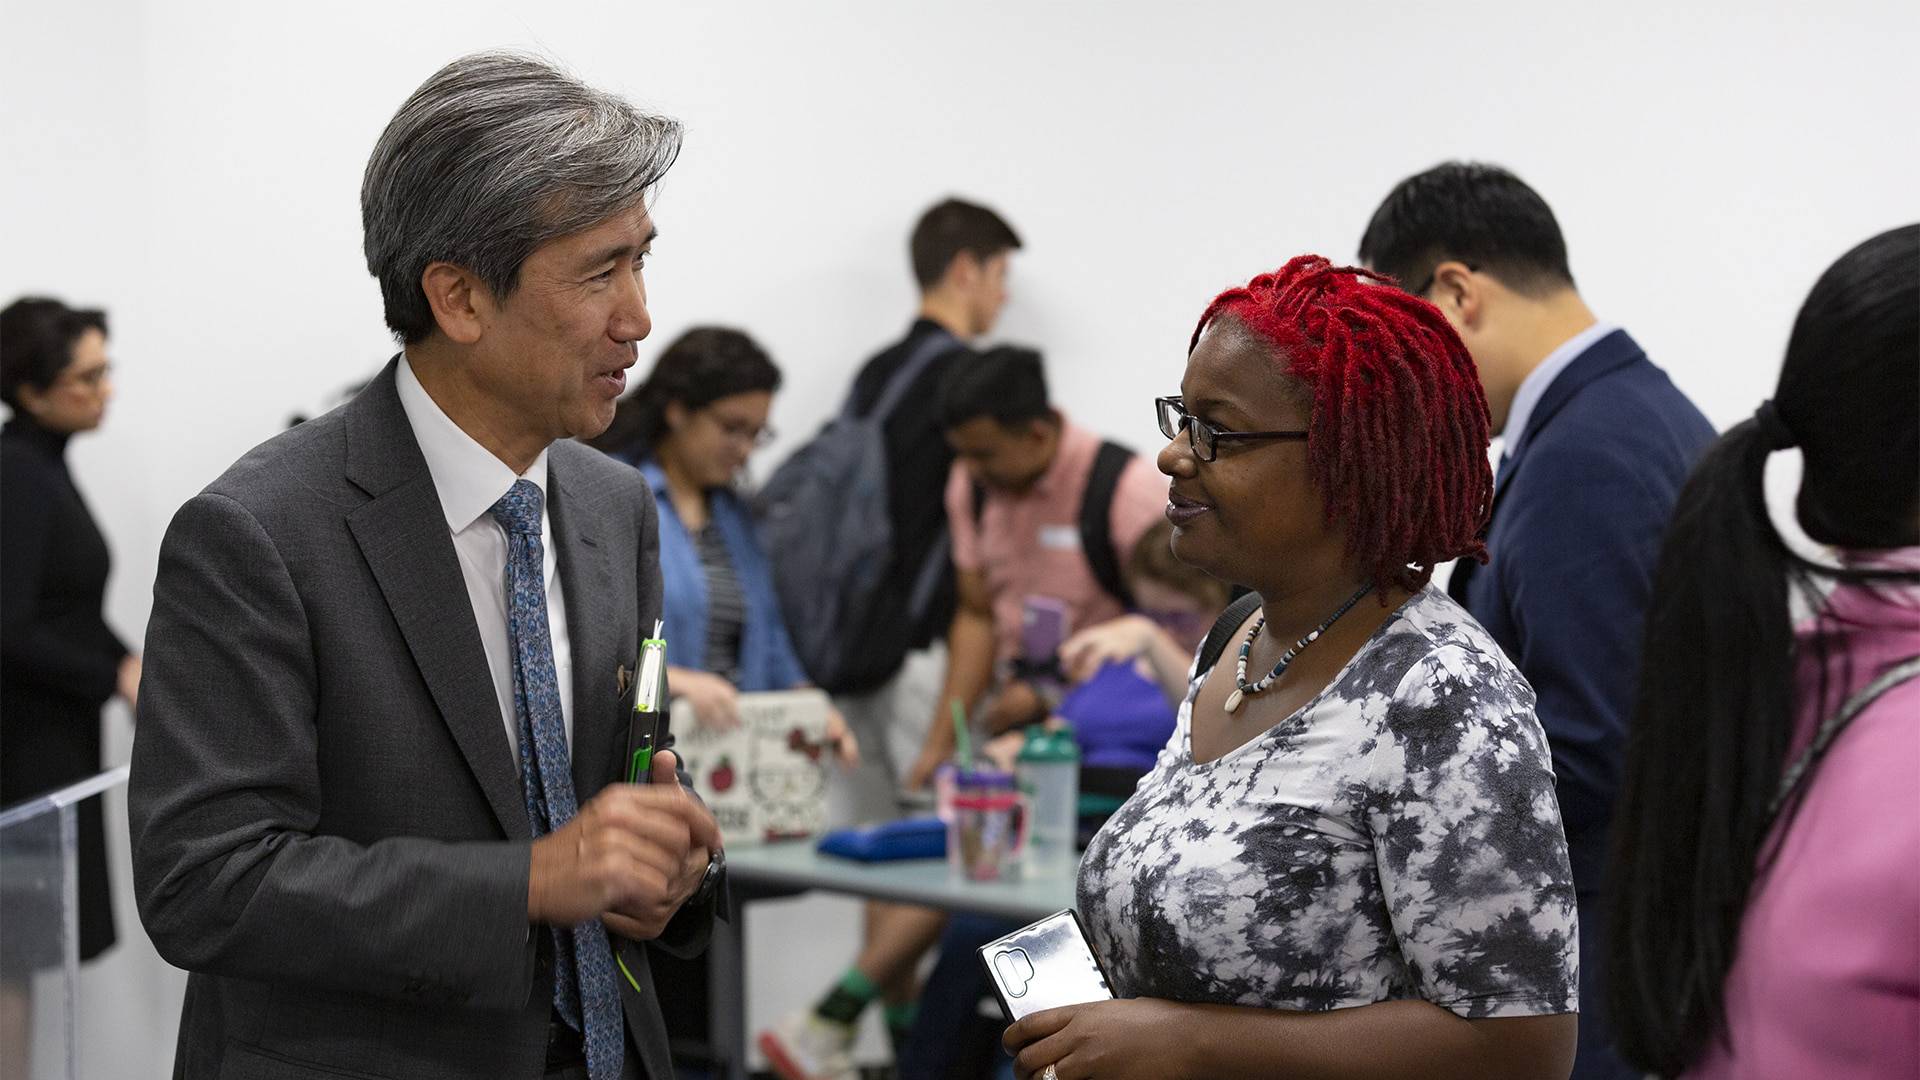 Korean diplomat discusses country's ties to Texas to UHCL students, administrators